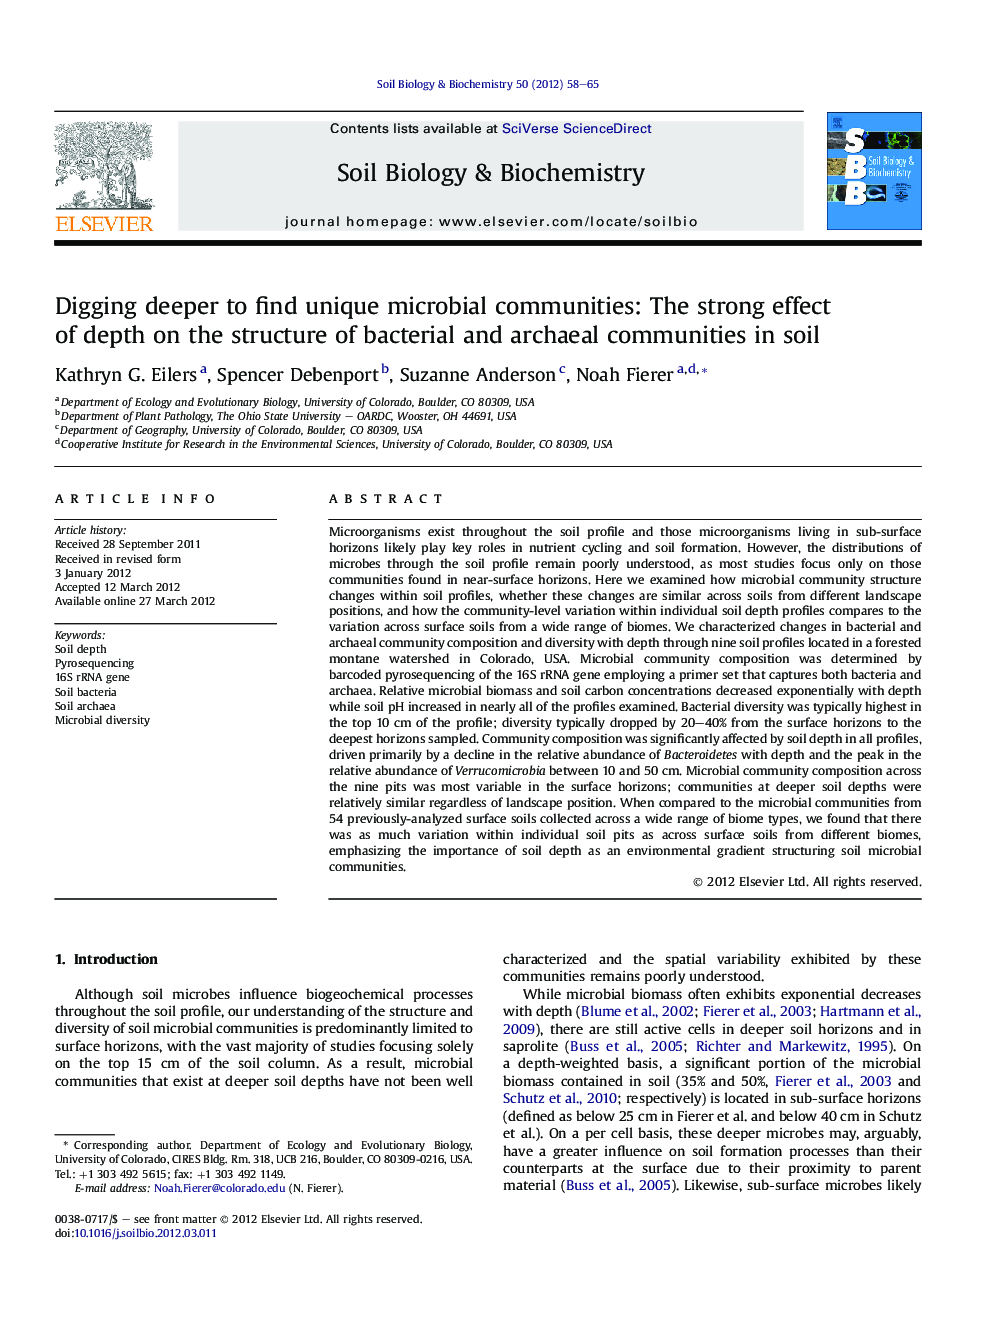 Digging deeper to find unique microbial communities: The strong effect of depth on the structure of bacterial and archaeal communities in soil